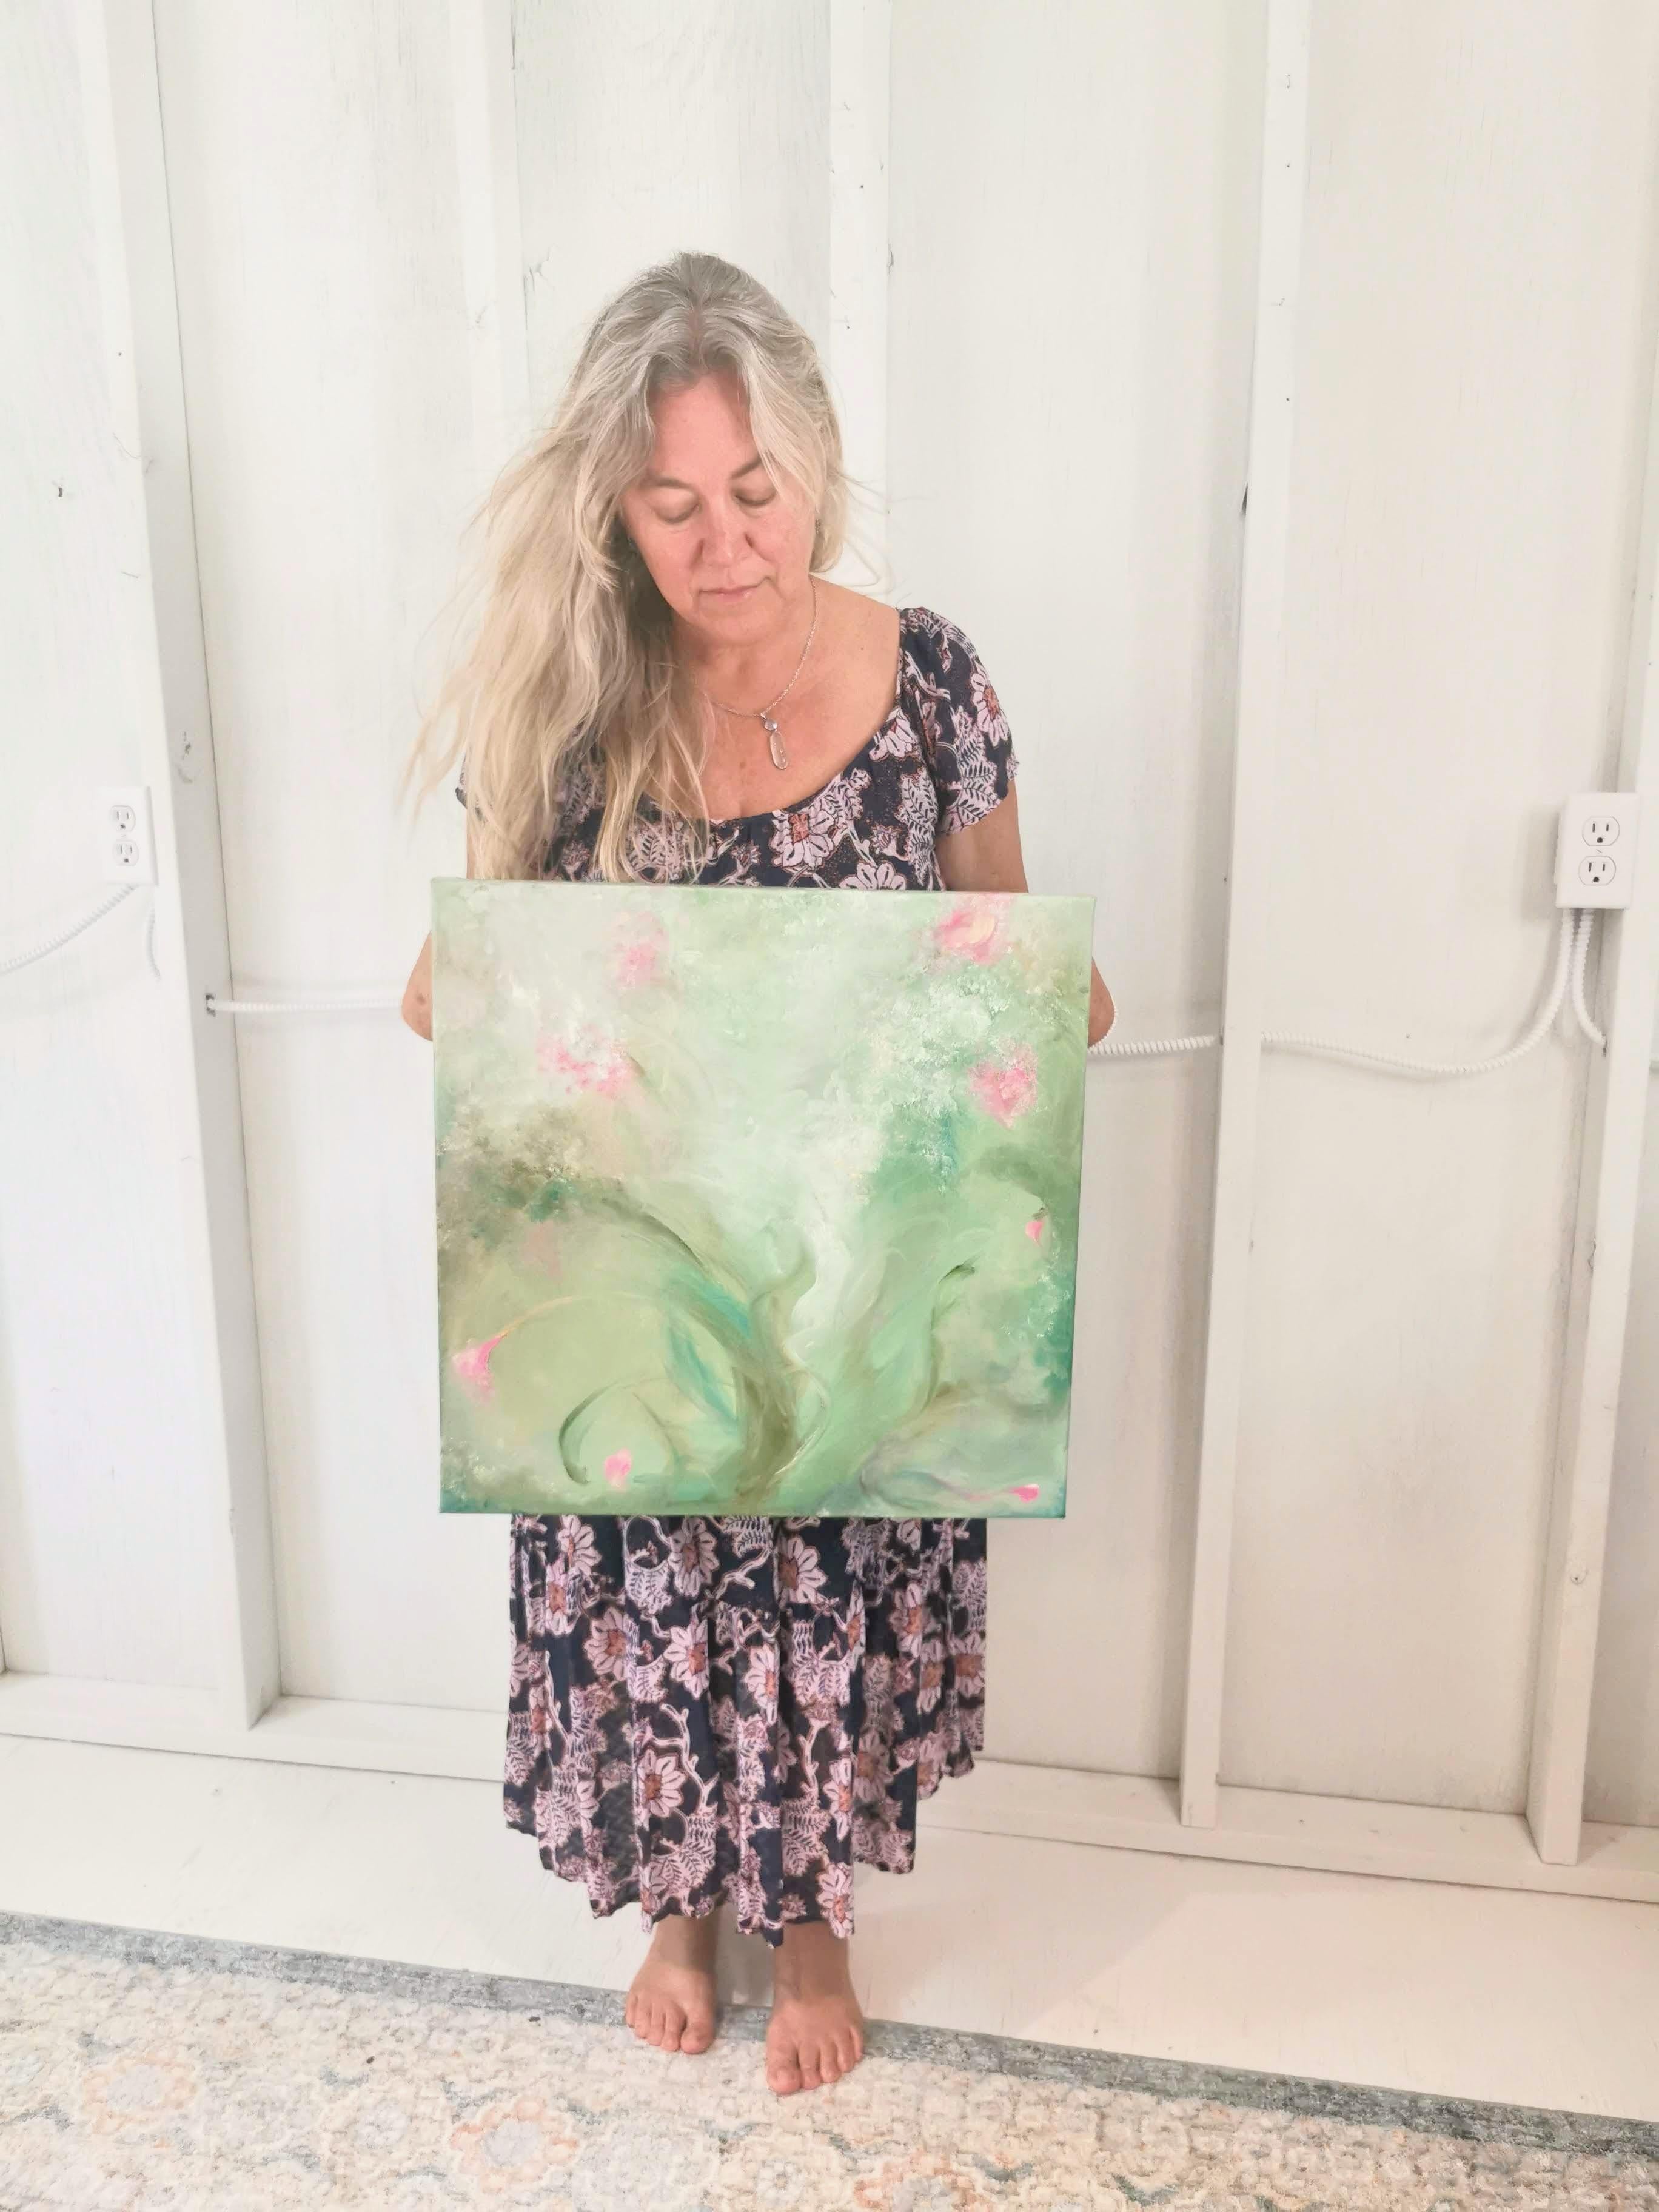 A most verdant spring - Whimsical green and pink abstract painting 1